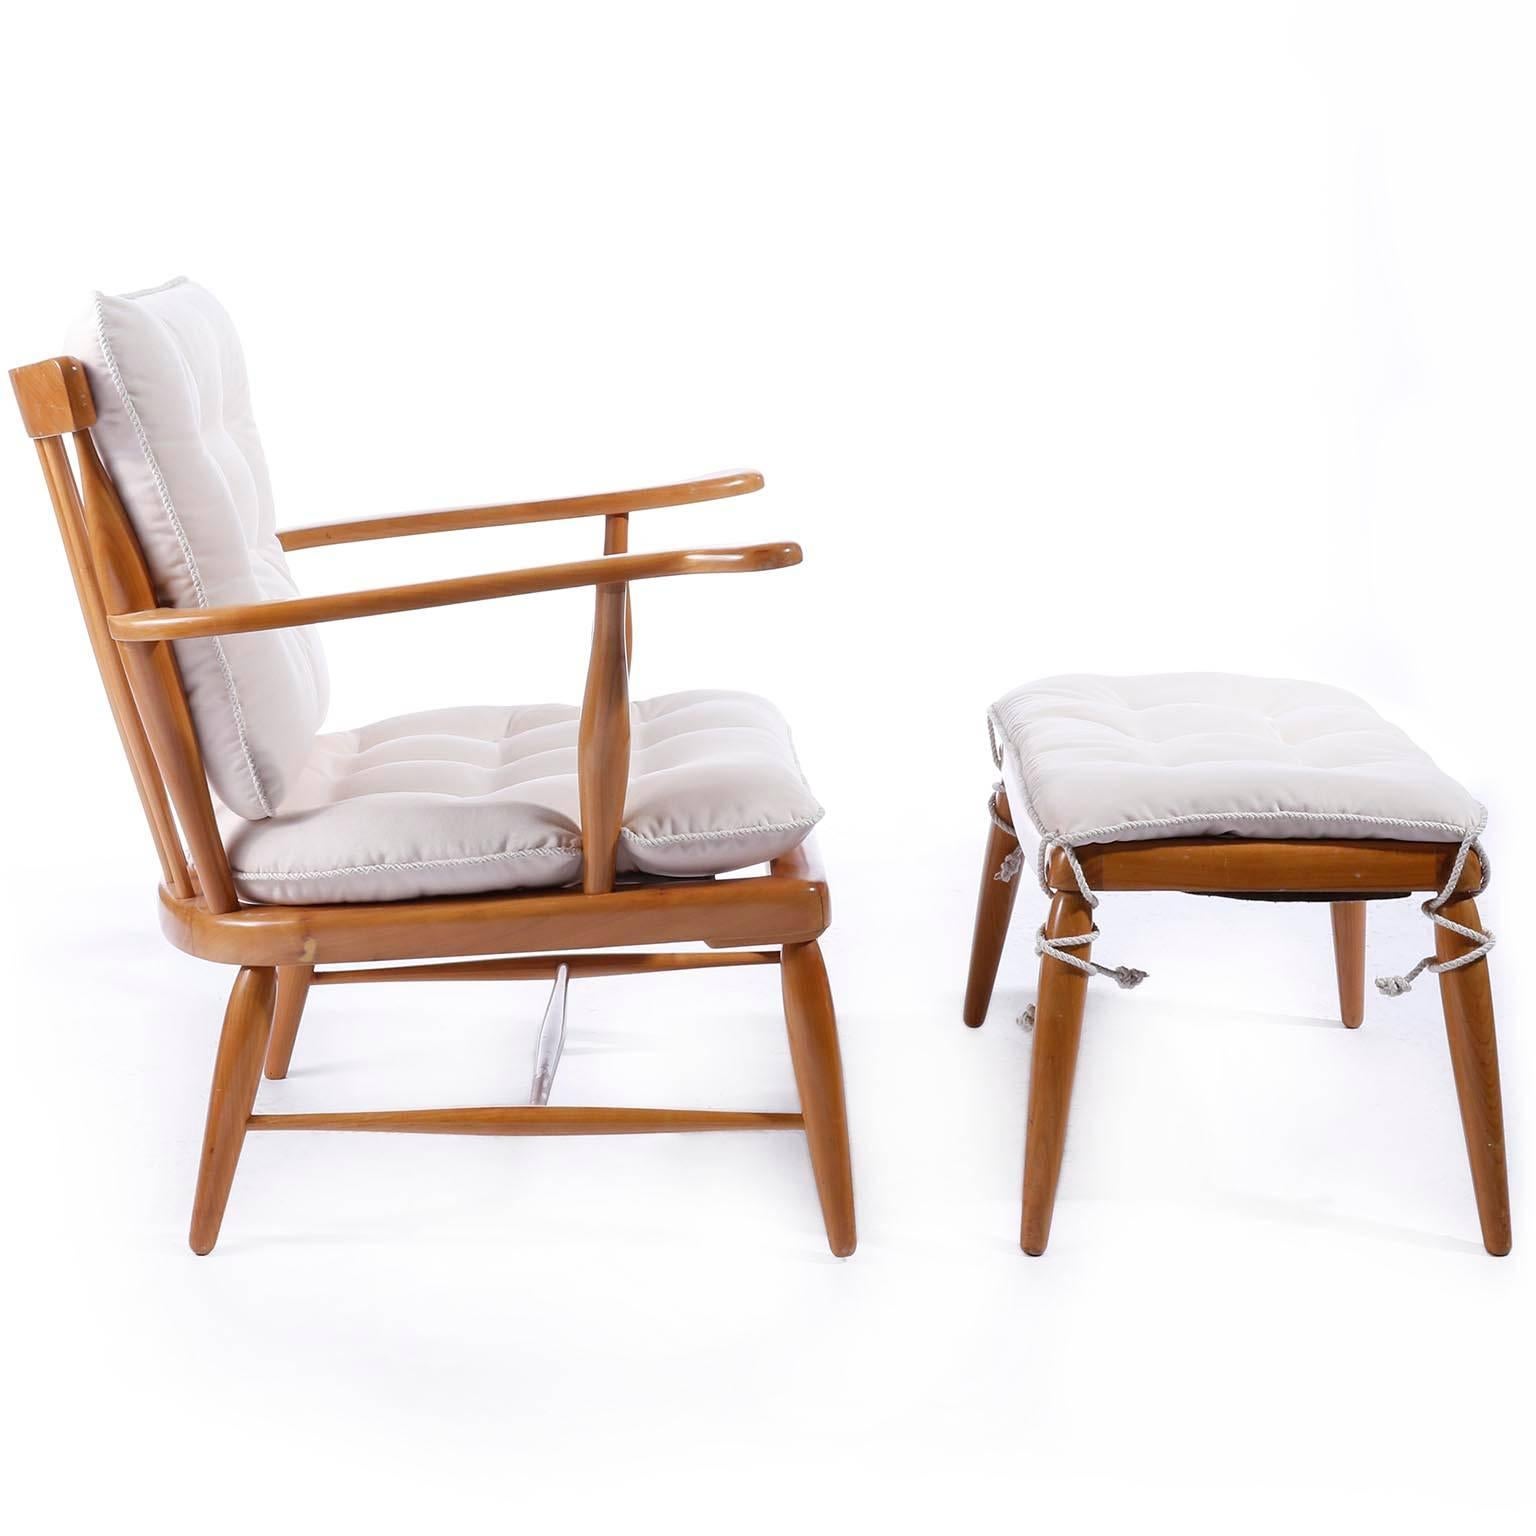 An easy chair with ottoman designed by Anna-Luelja Praun (1906-2004), Vienna, Austria, manufactured in midcentury, circa 1952.
It is made of a warm toned solid wood frame with loose cushions for the seats and the back. 
The cushions have been